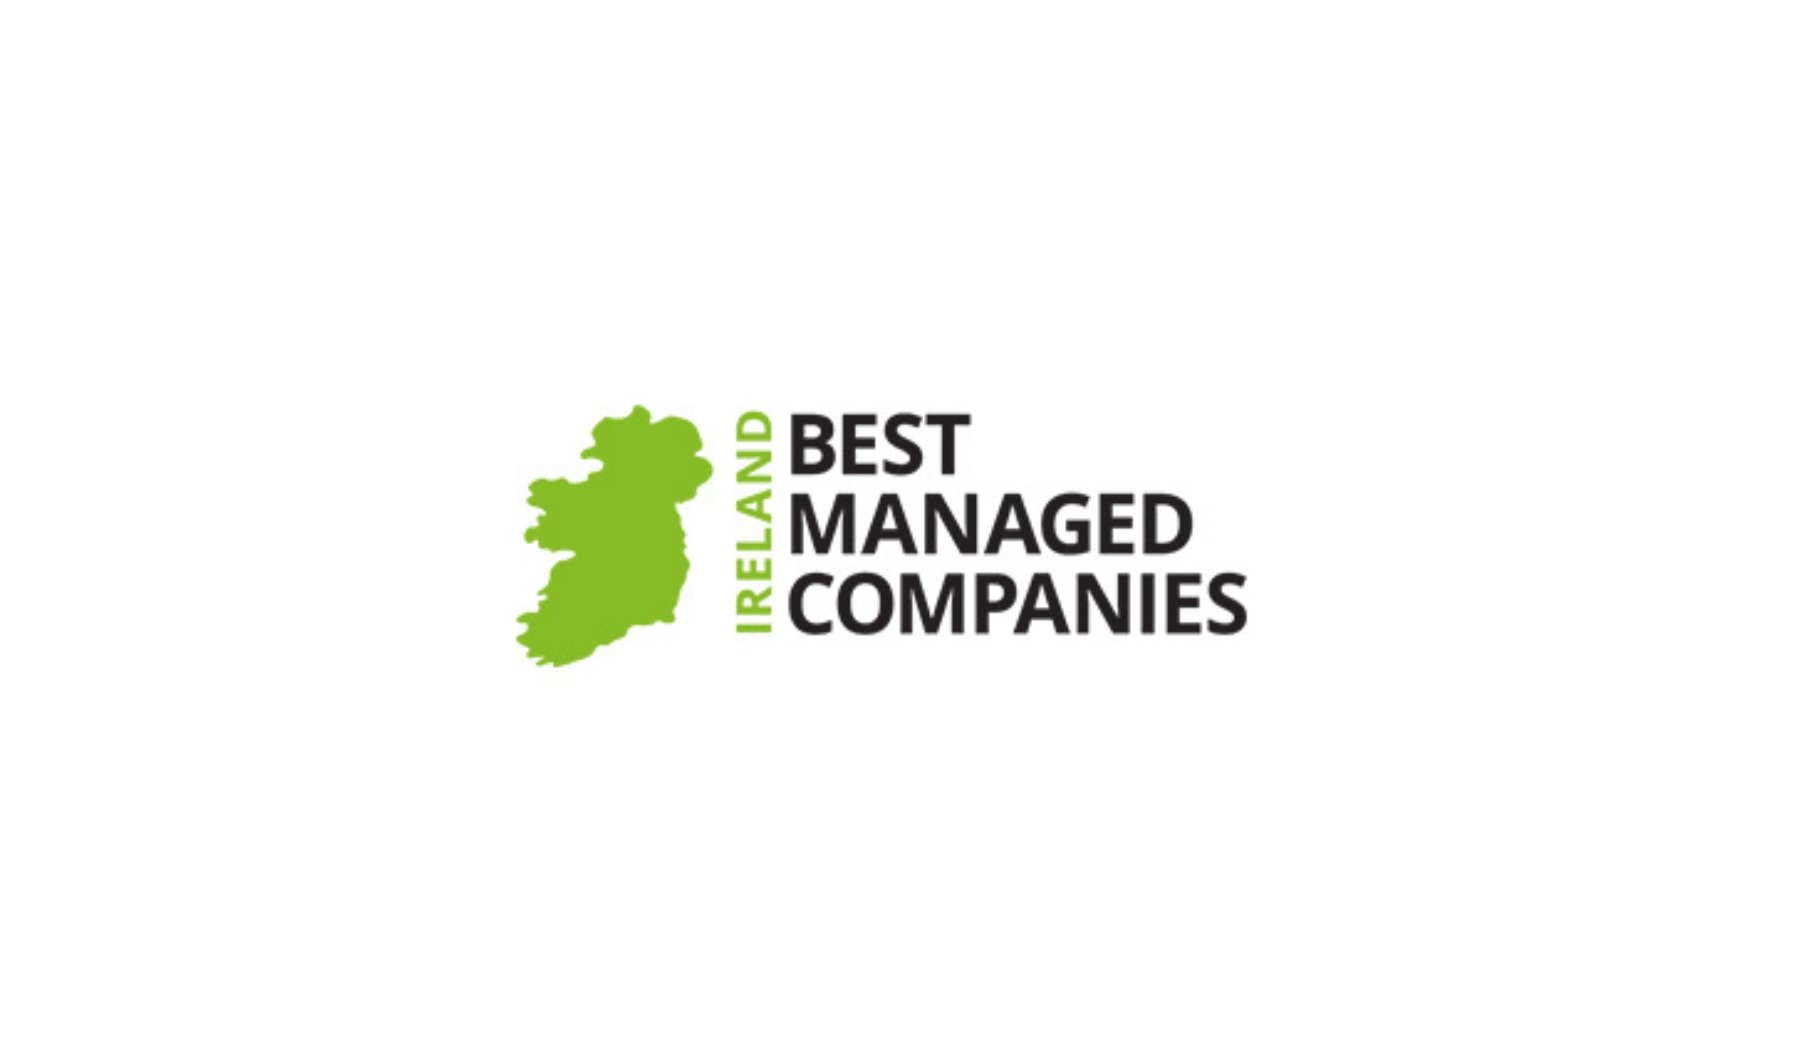 Ocuco Included as One Of Ireland’s Best Managed Companies for 2021